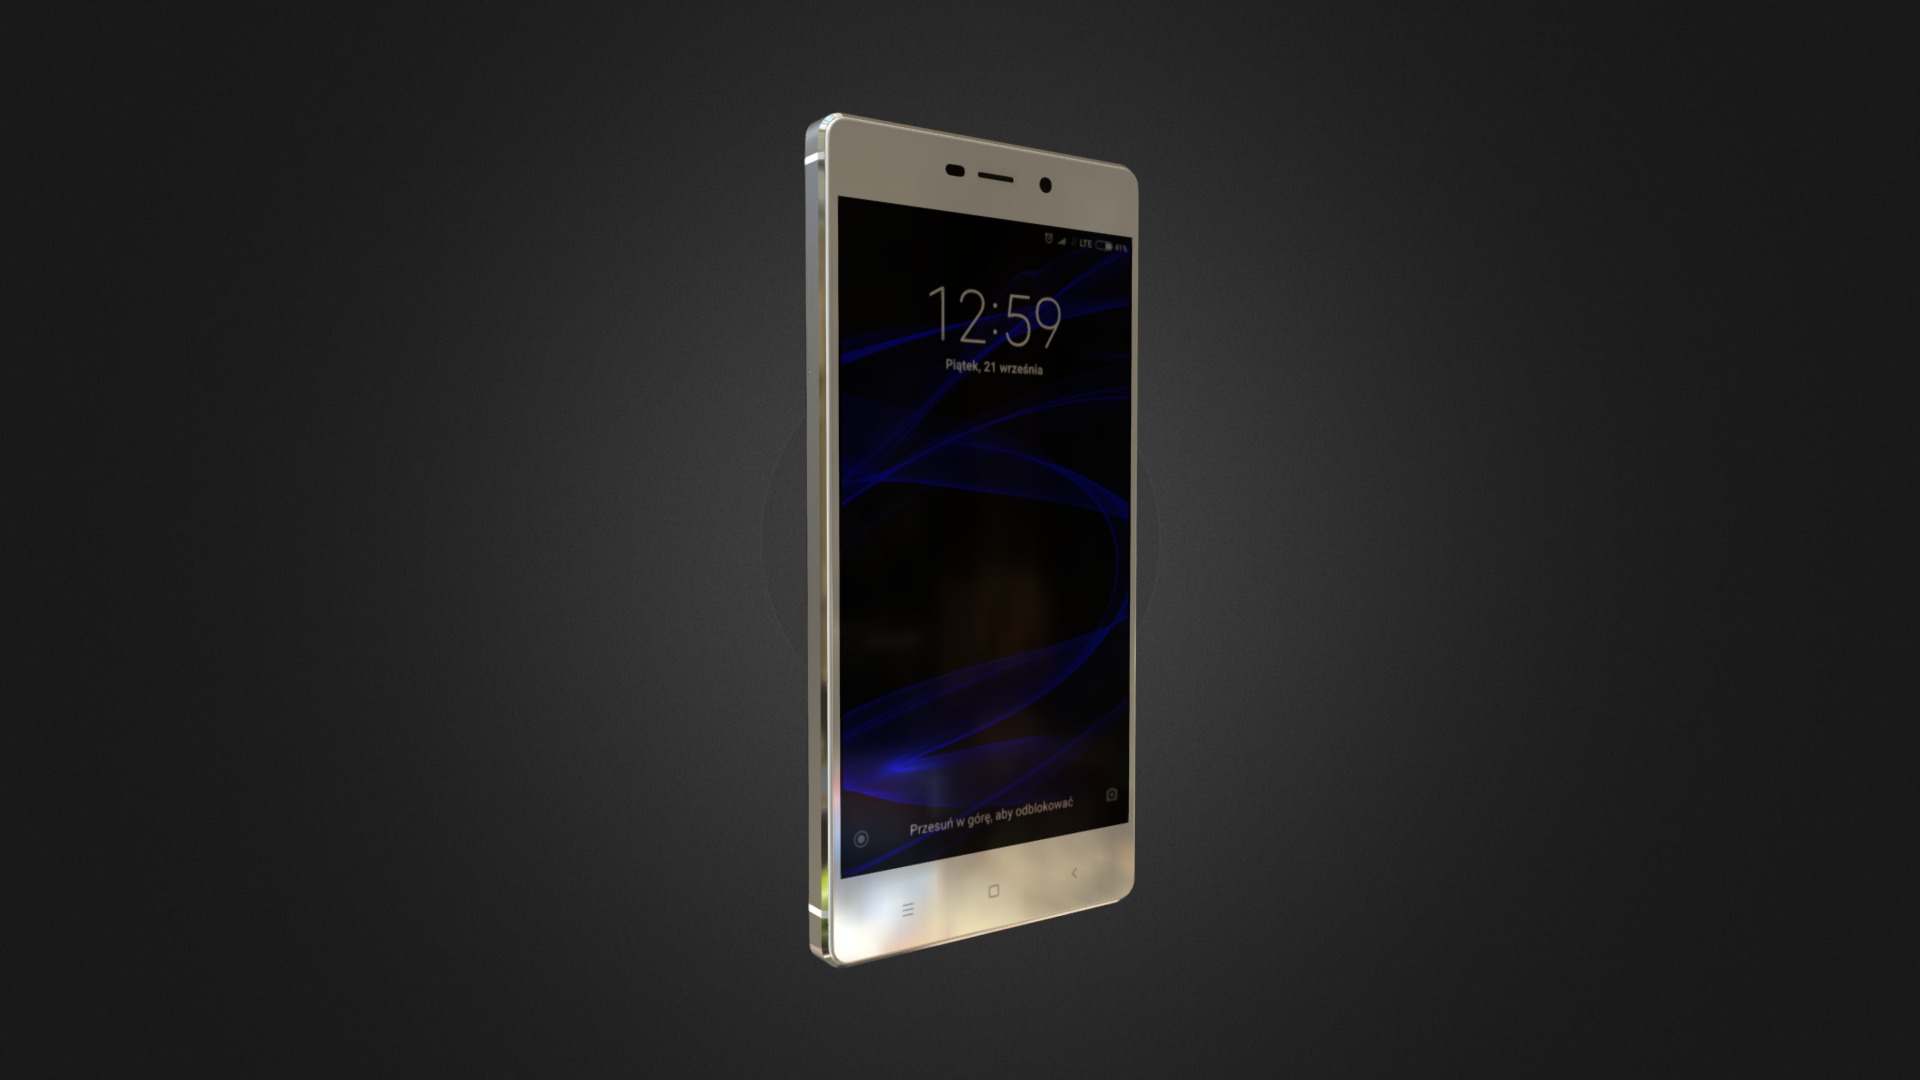 3D model Xiaomi Redmi 4 Pro - This is a 3D model of the Xiaomi Redmi 4 Pro. The 3D model is about a white cell phone.